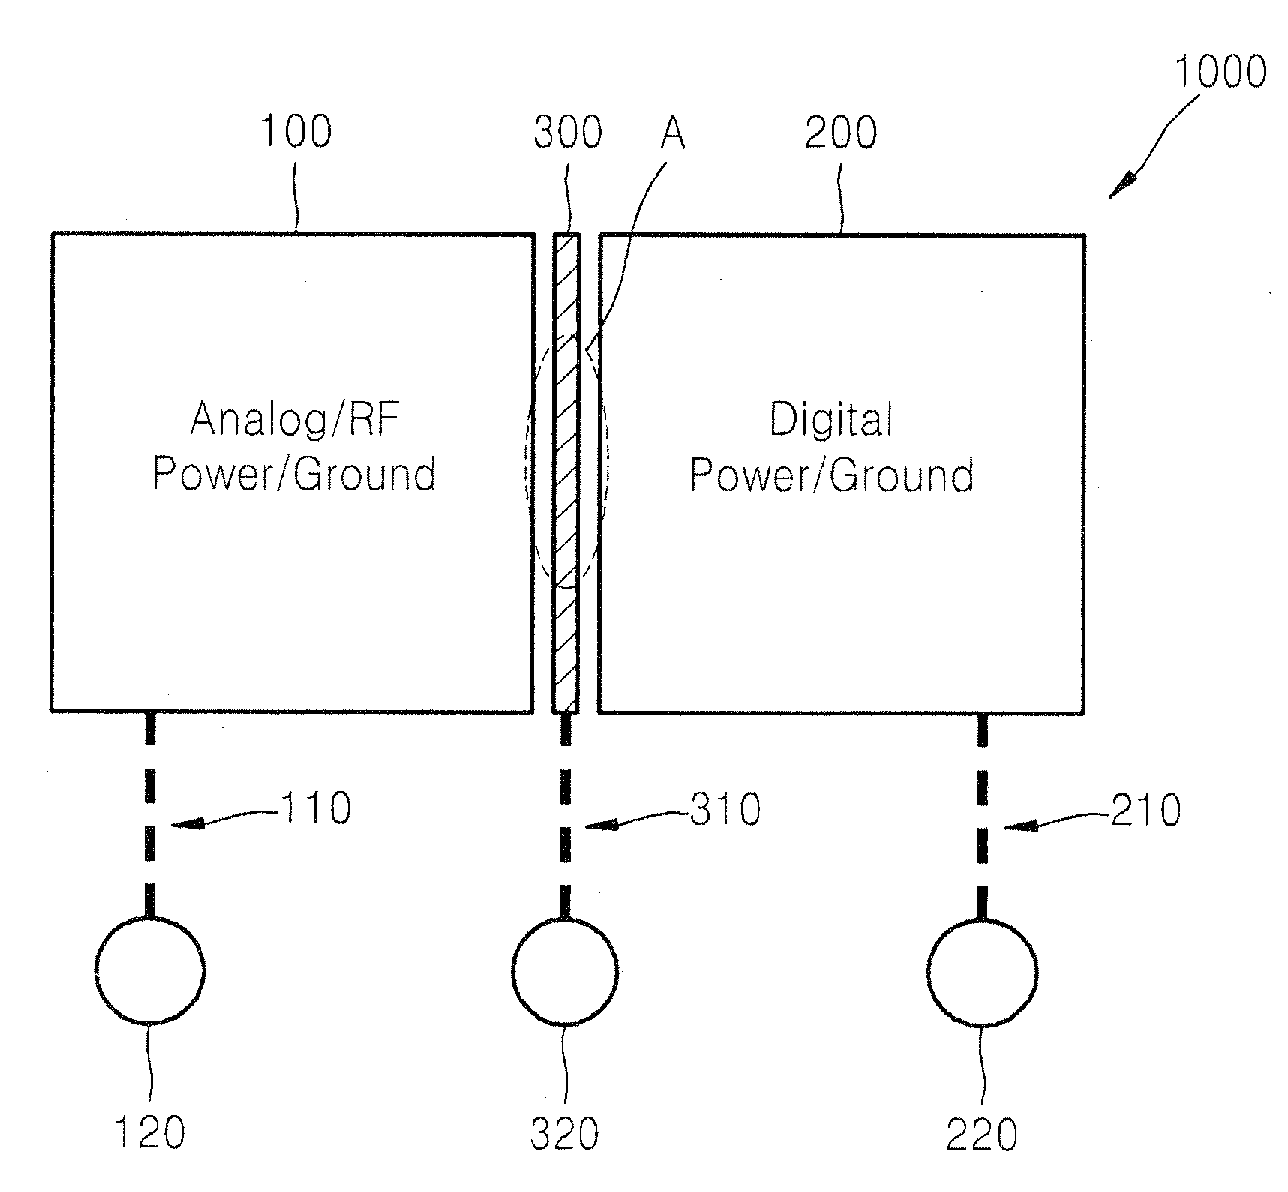 Multi-ground shielding semiconductor package, method of fabricating the package, and method of preventing noise using multi-ground shielding